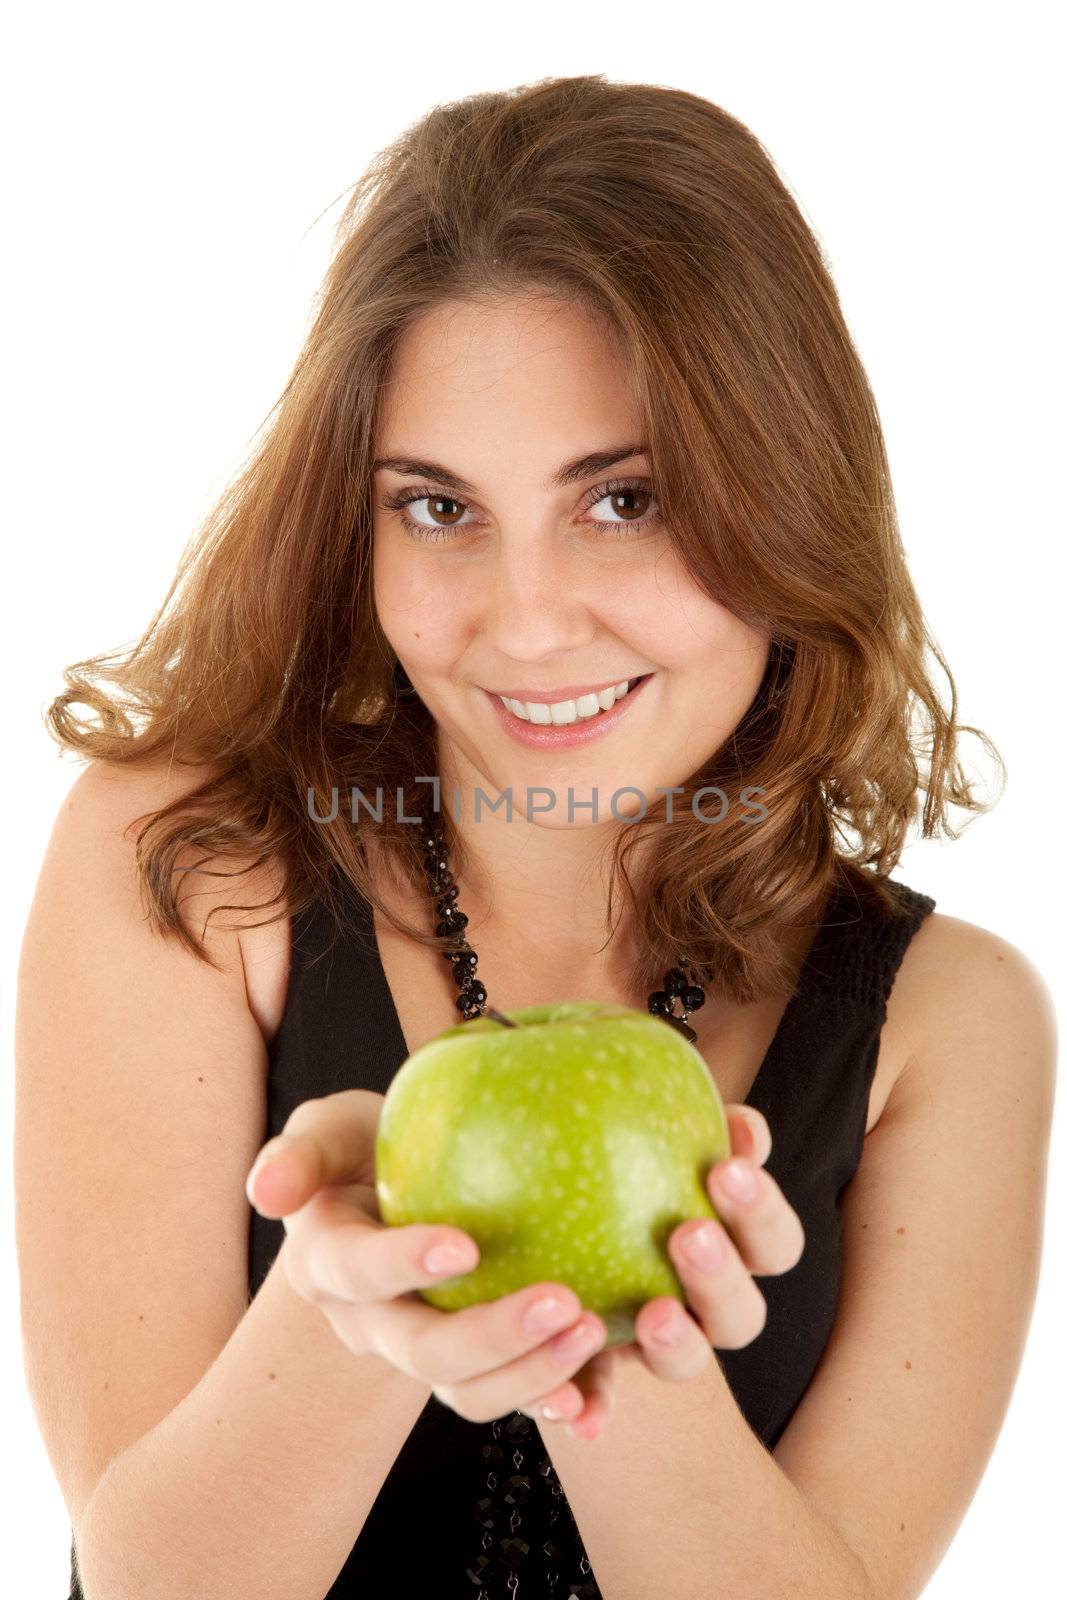 Beauty woman with fresh green apple on white background. Focus on women's eyes.